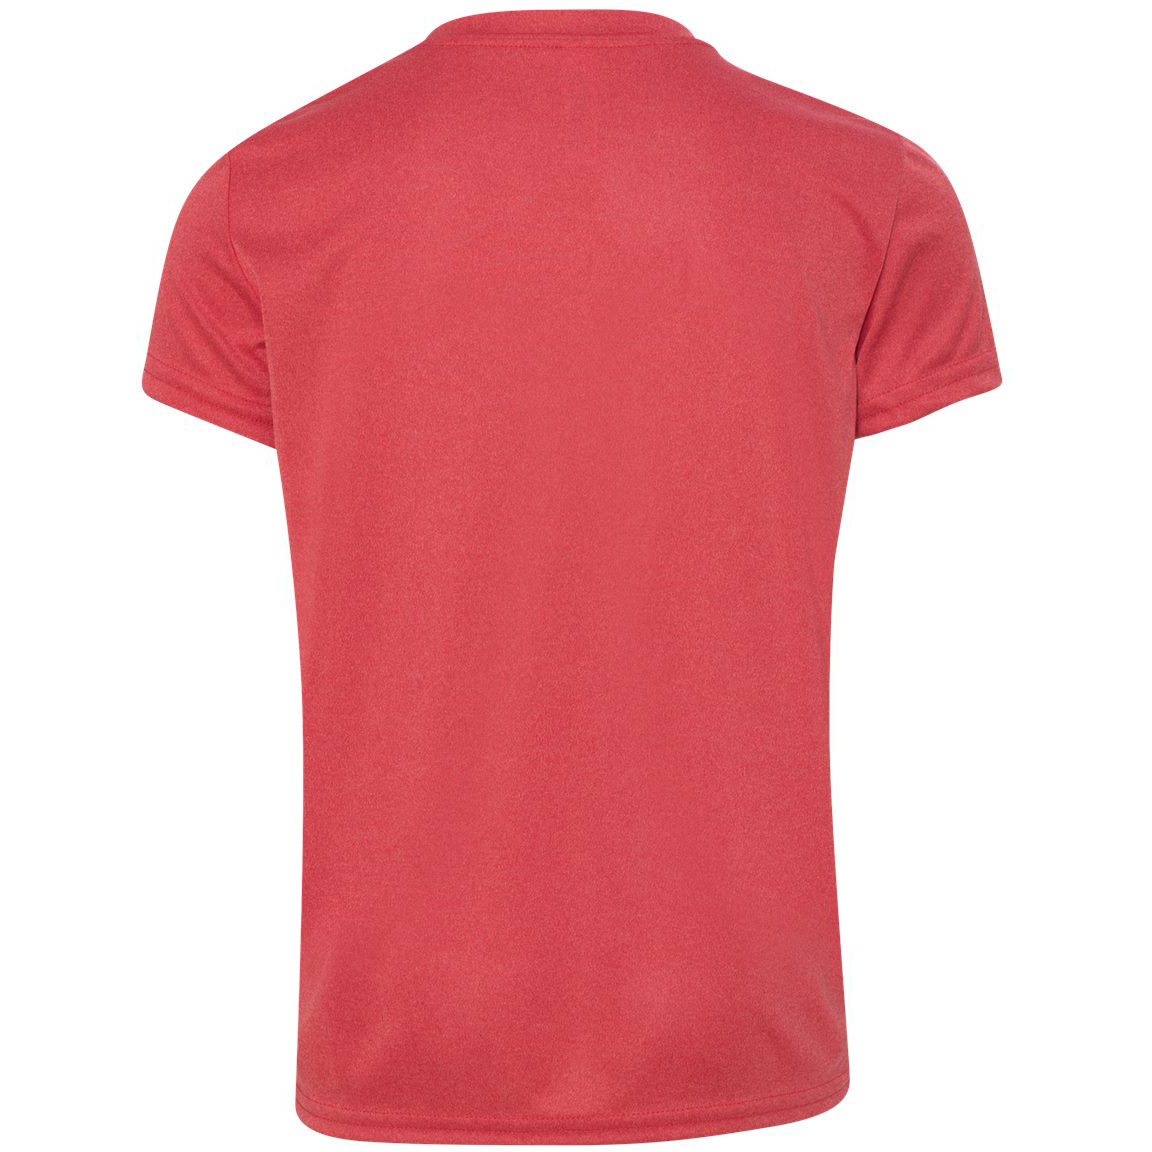 All Sport Y1009 Youth Performance Short Sleeve T-Shirt - Heather Red ...